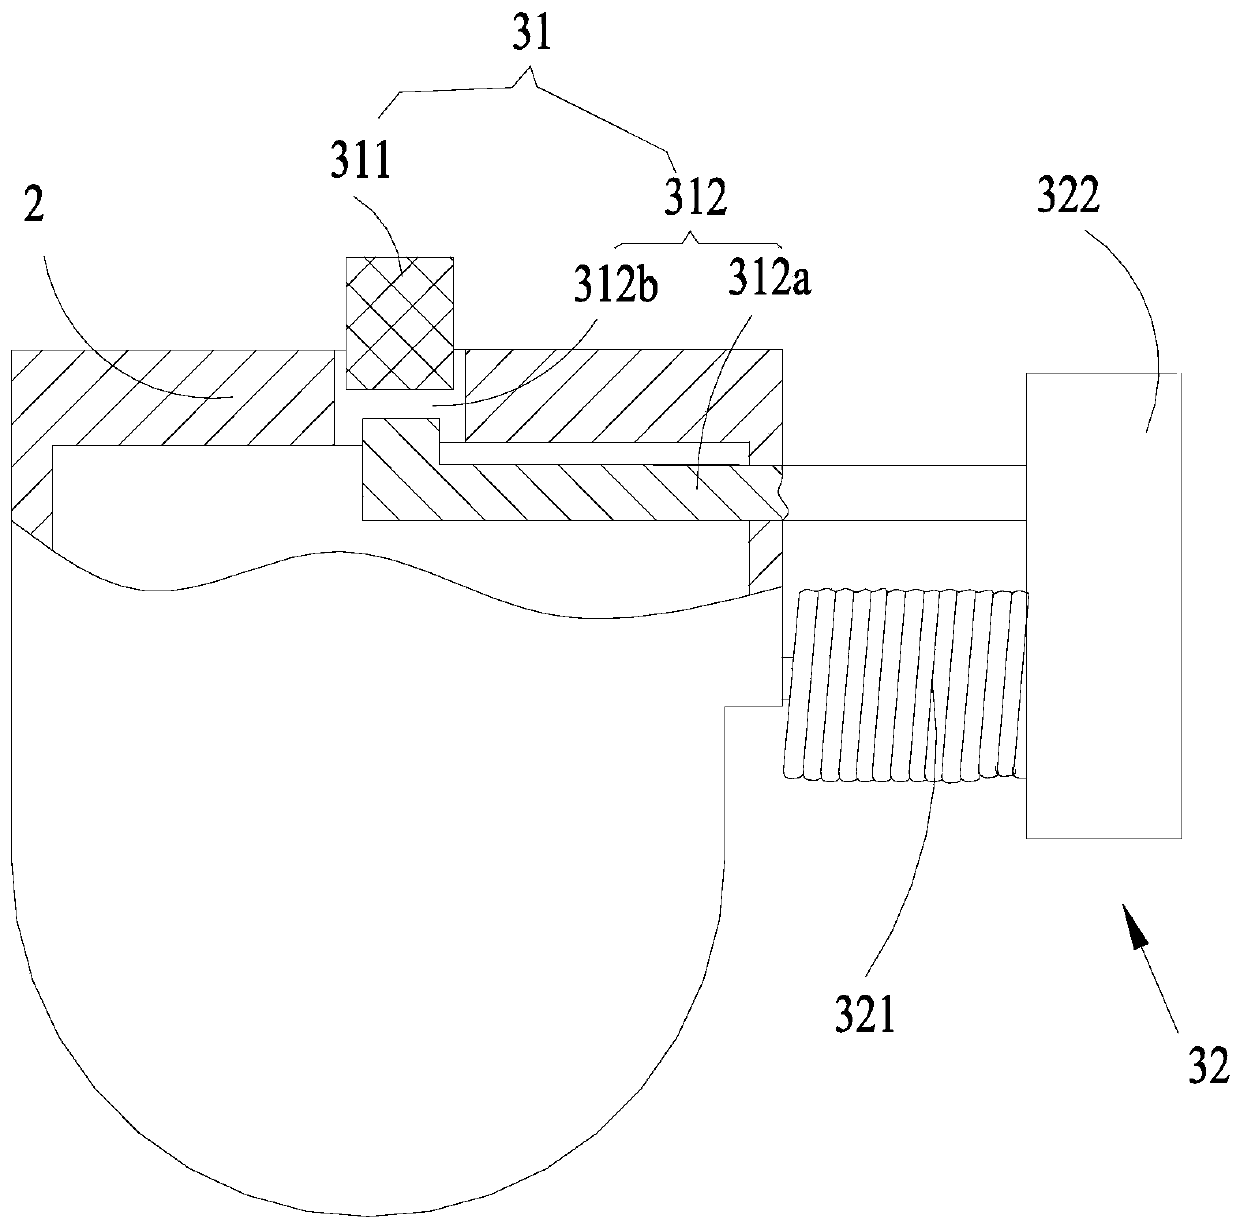 foldable display device